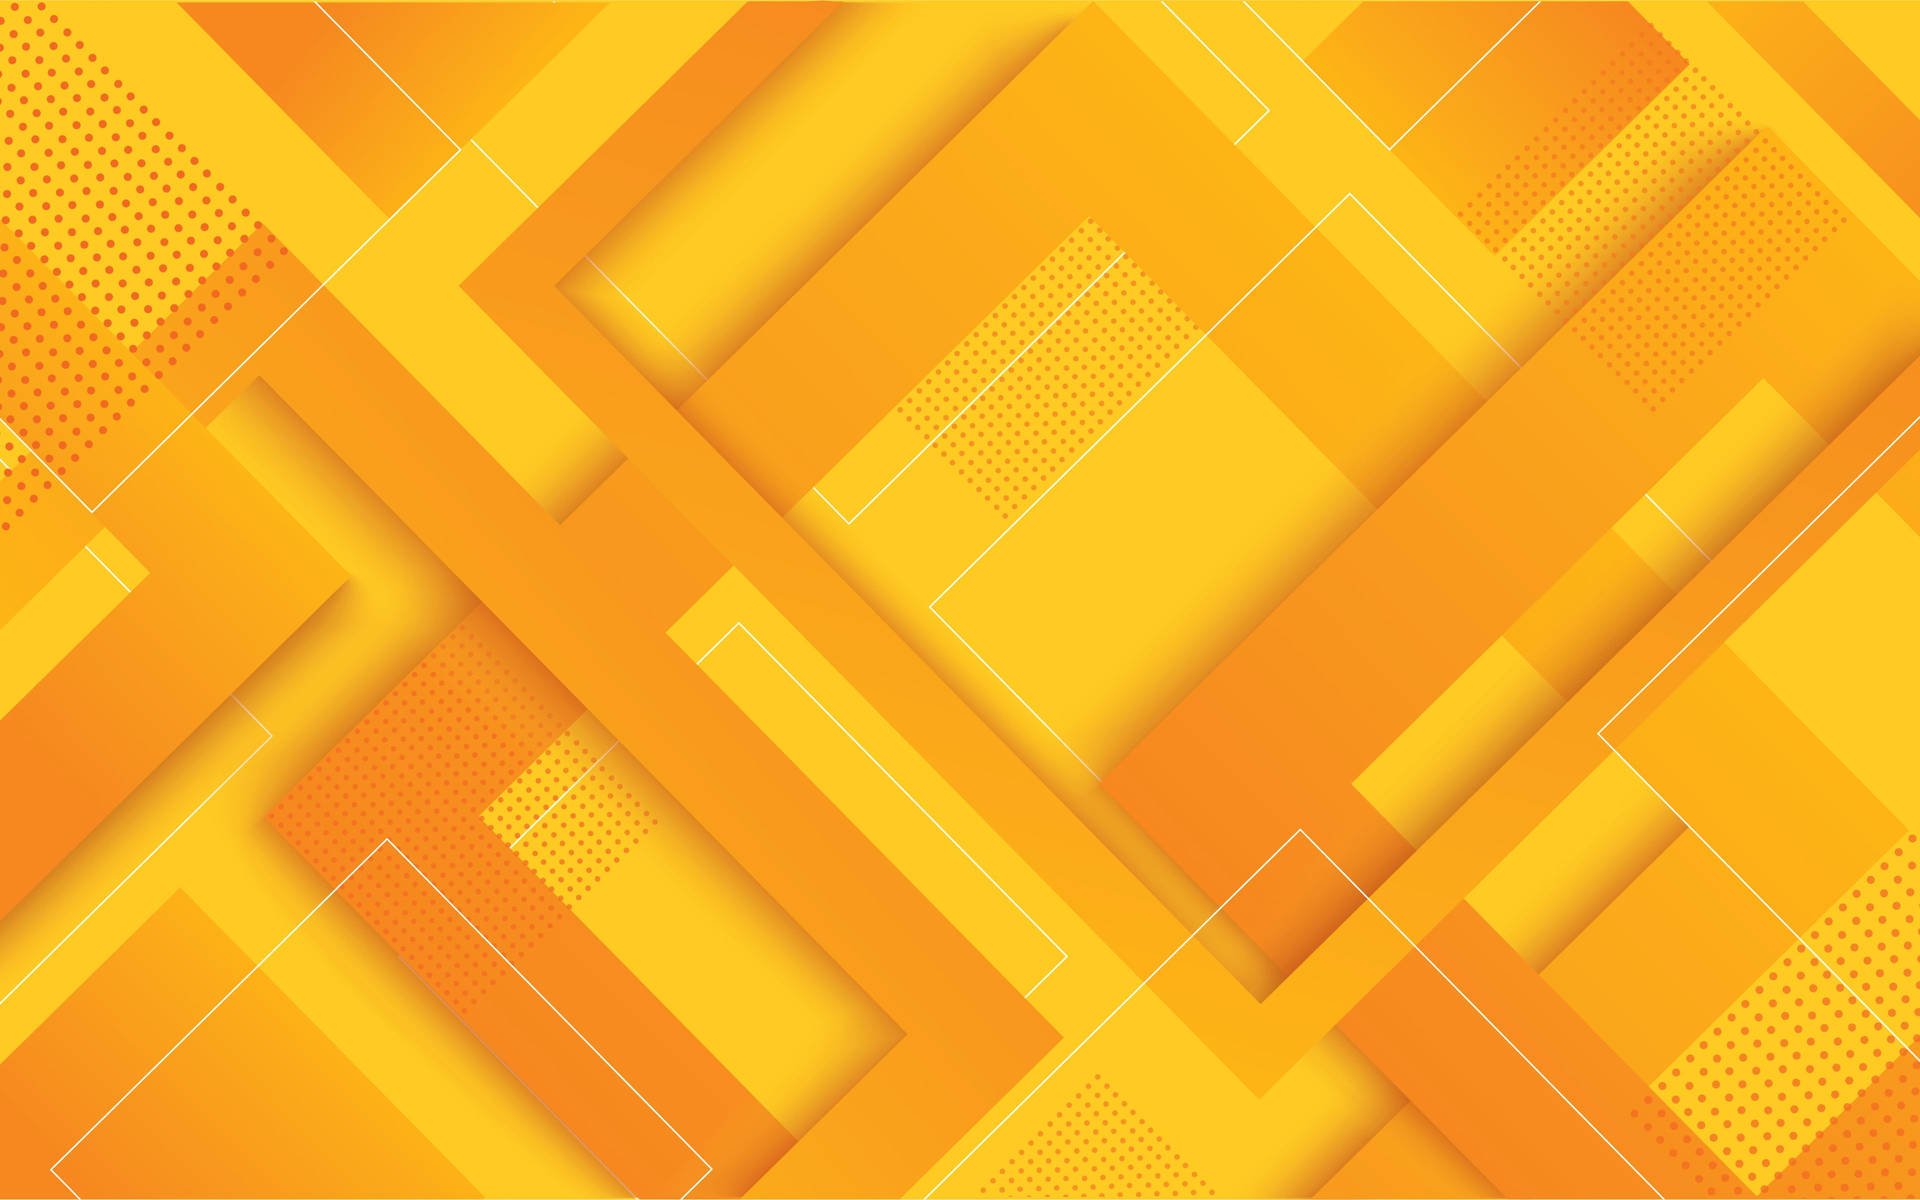 Download Orange And Yellow Abstract Material Design Wallpaper